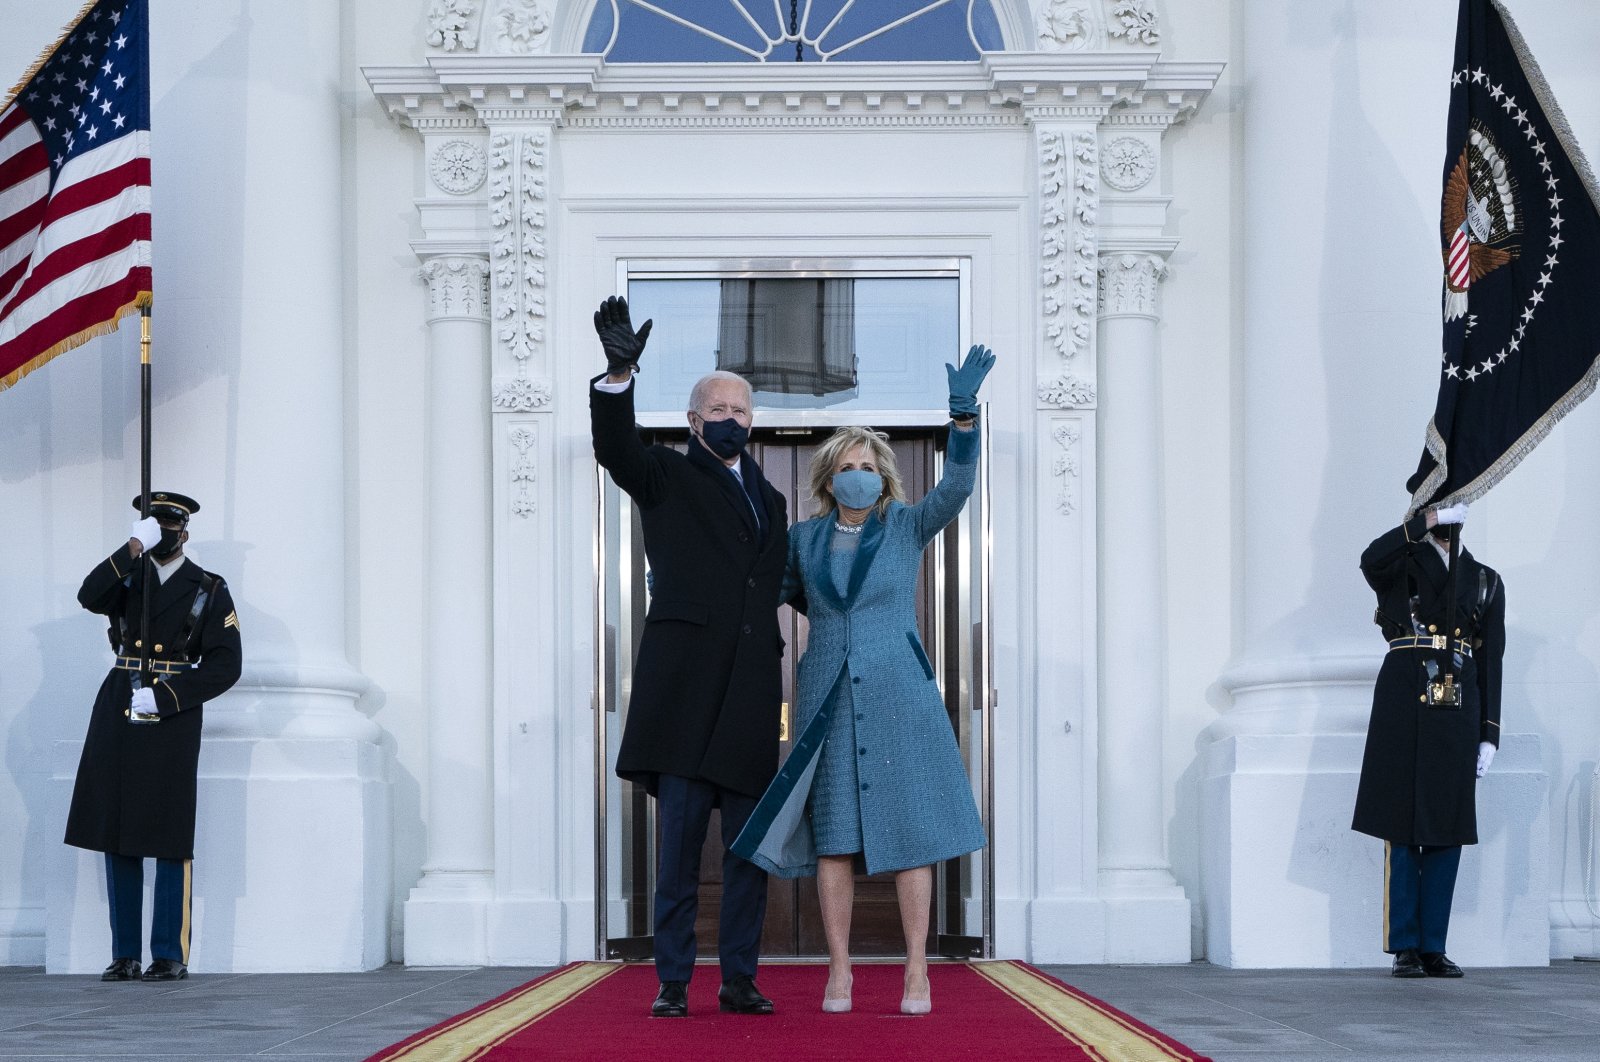 U.S. President Joe Biden and first lady Jill Biden wave as they arrive at the North Portico of the White House, Wednesday, Jan. 20, 2021, in Washington. (AP Photo)